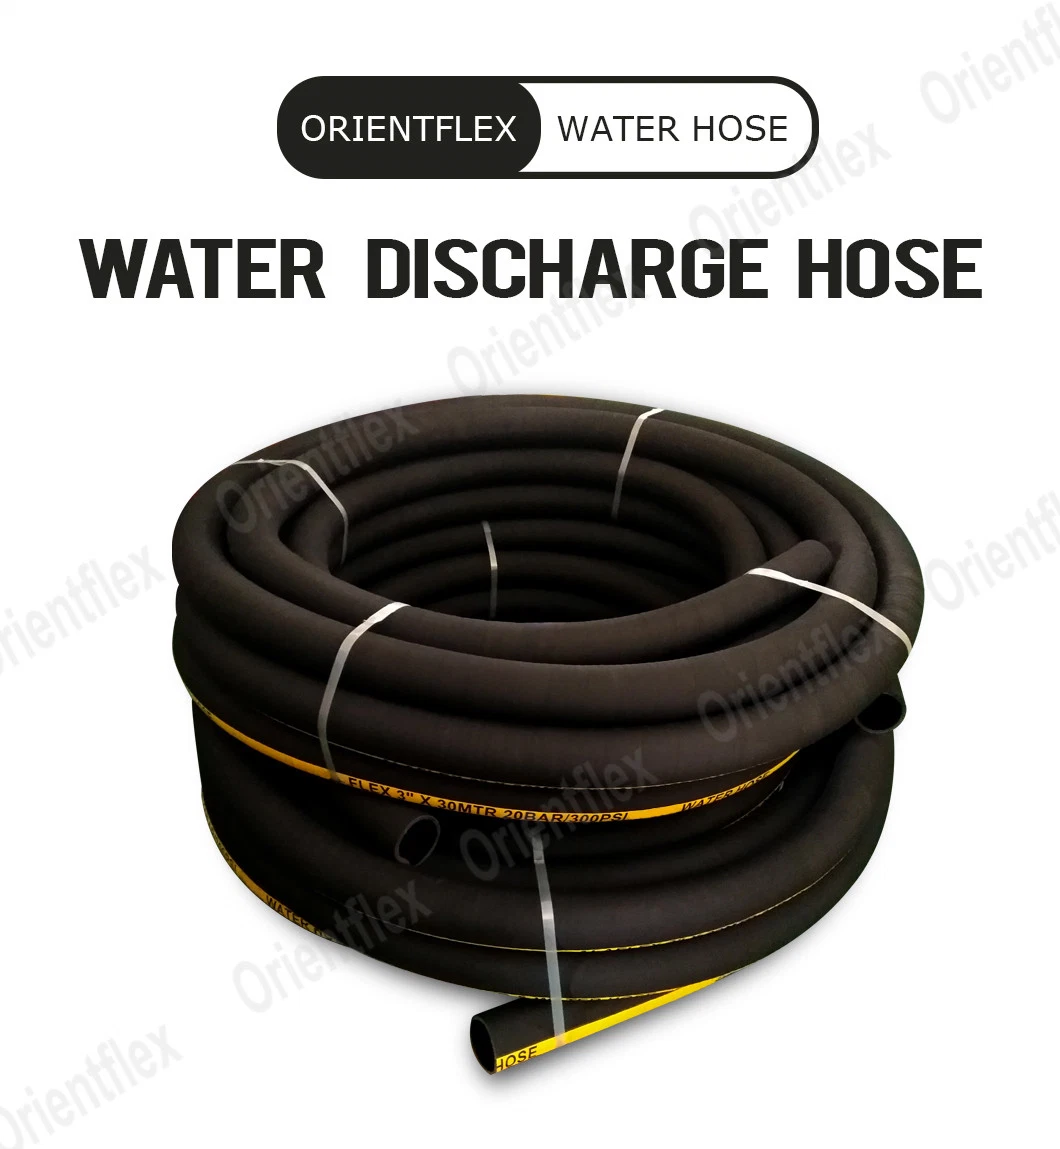 100 FT Soft Flexible Pressurized Heavy Duty Water Pump Intake Discharge Hose